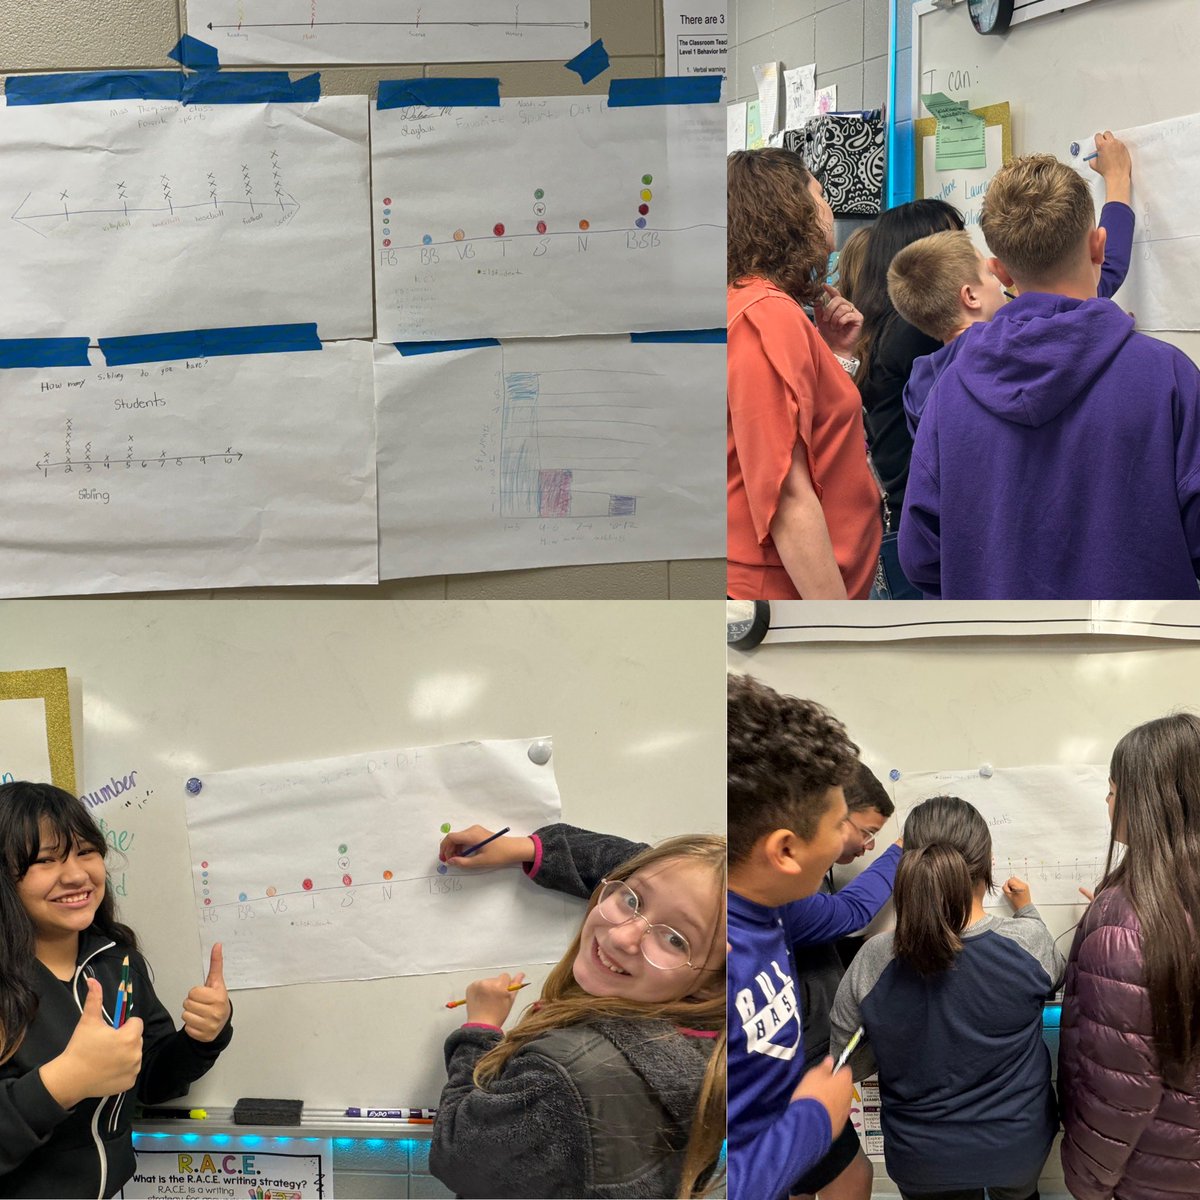 Mrs. Hollingsworth’s sixth grade students are making data meaningful by using the data they collected to create dot plots, line plots, and histograms at Susan Moore Elementary! Awesome work, guys!
@AMSTI_Athens @AlabamaAchieves @BC_Schools @AMSTI4all